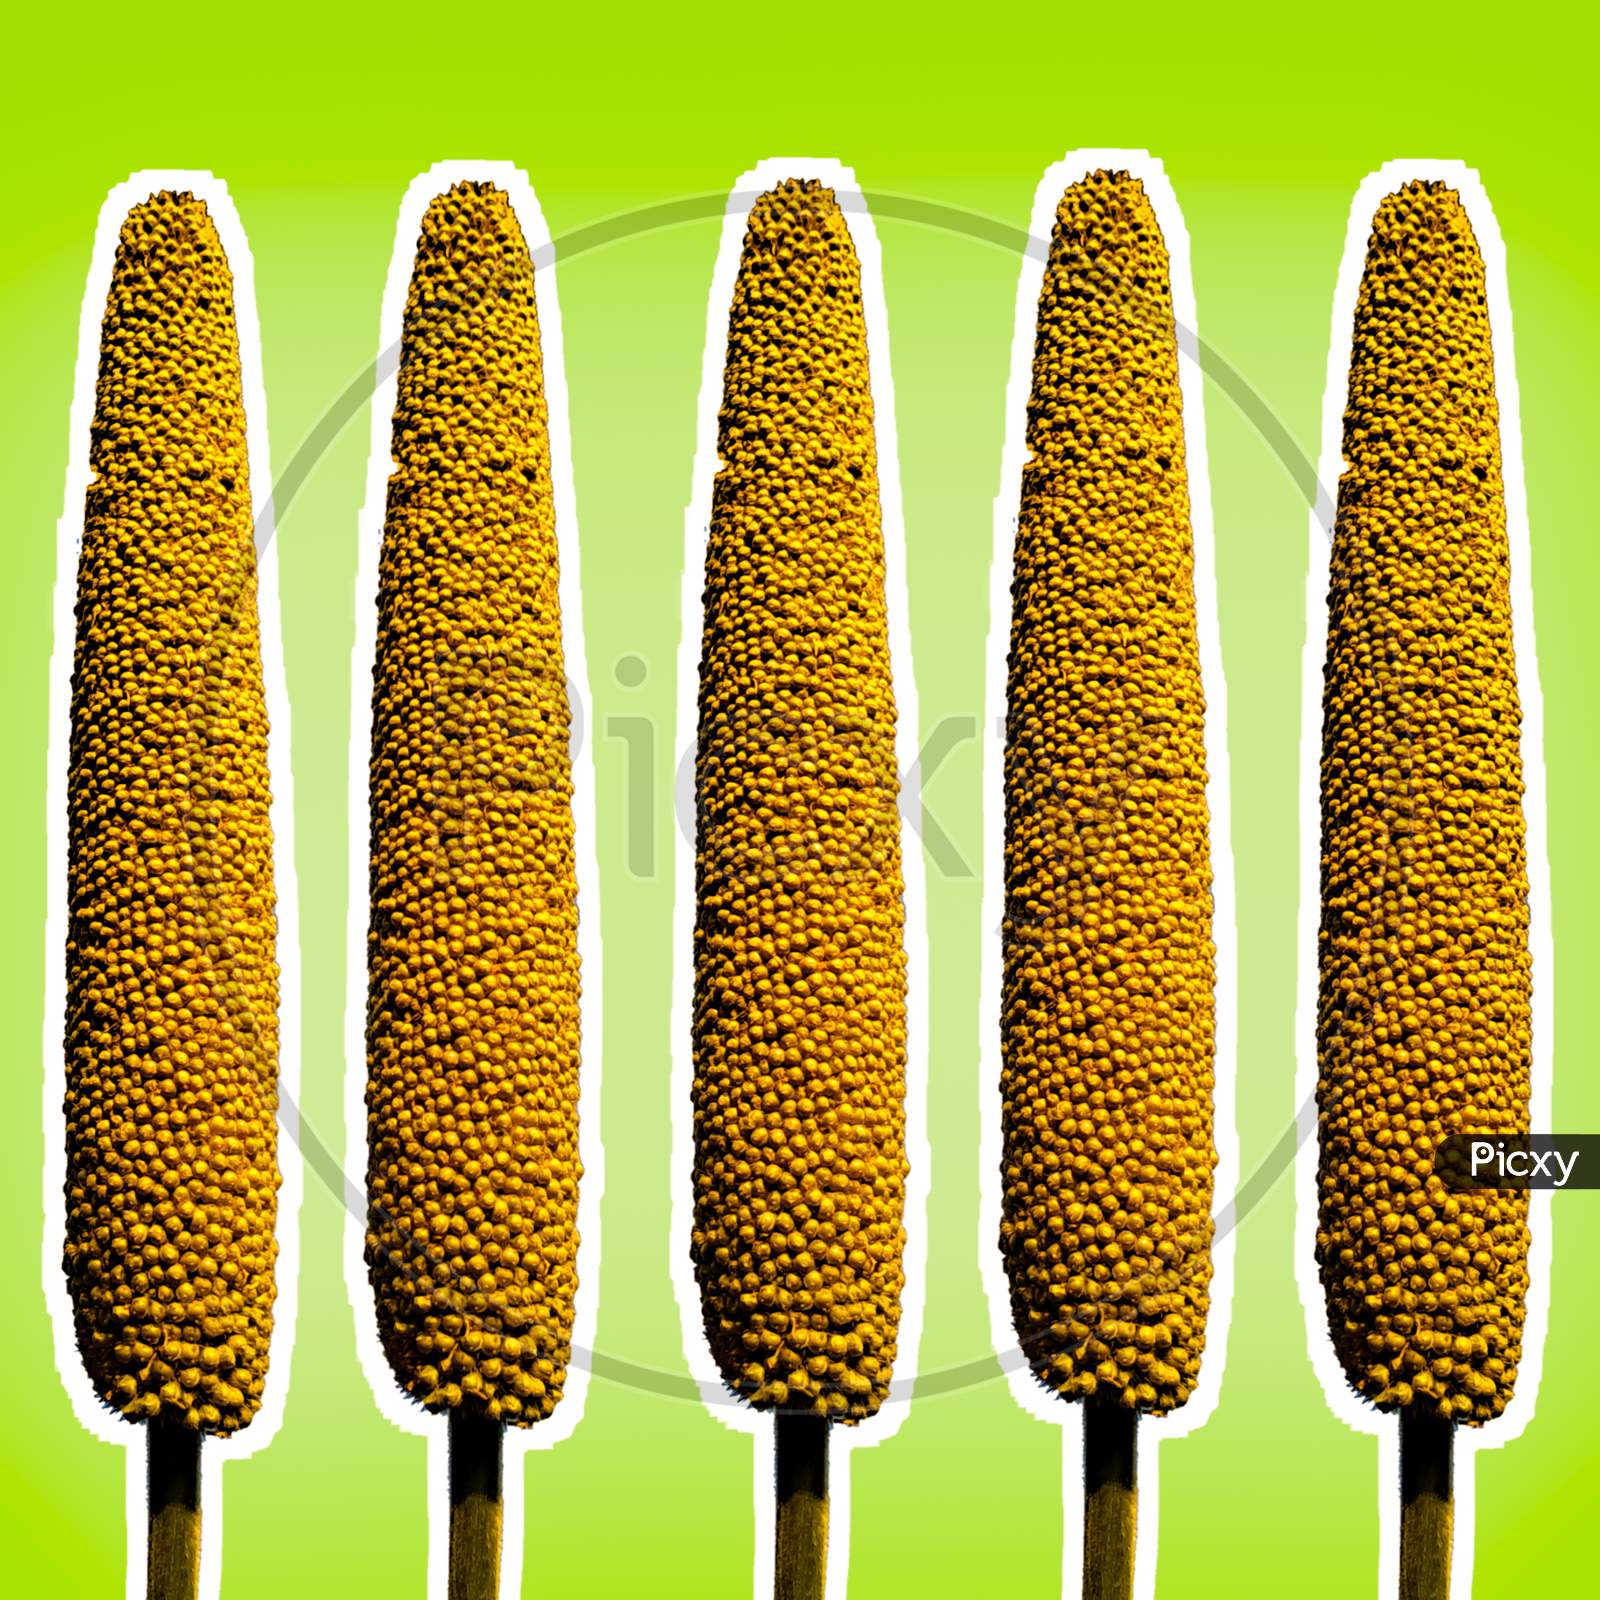 Fresh Millet Ears Isolated On Lime And Mint Background